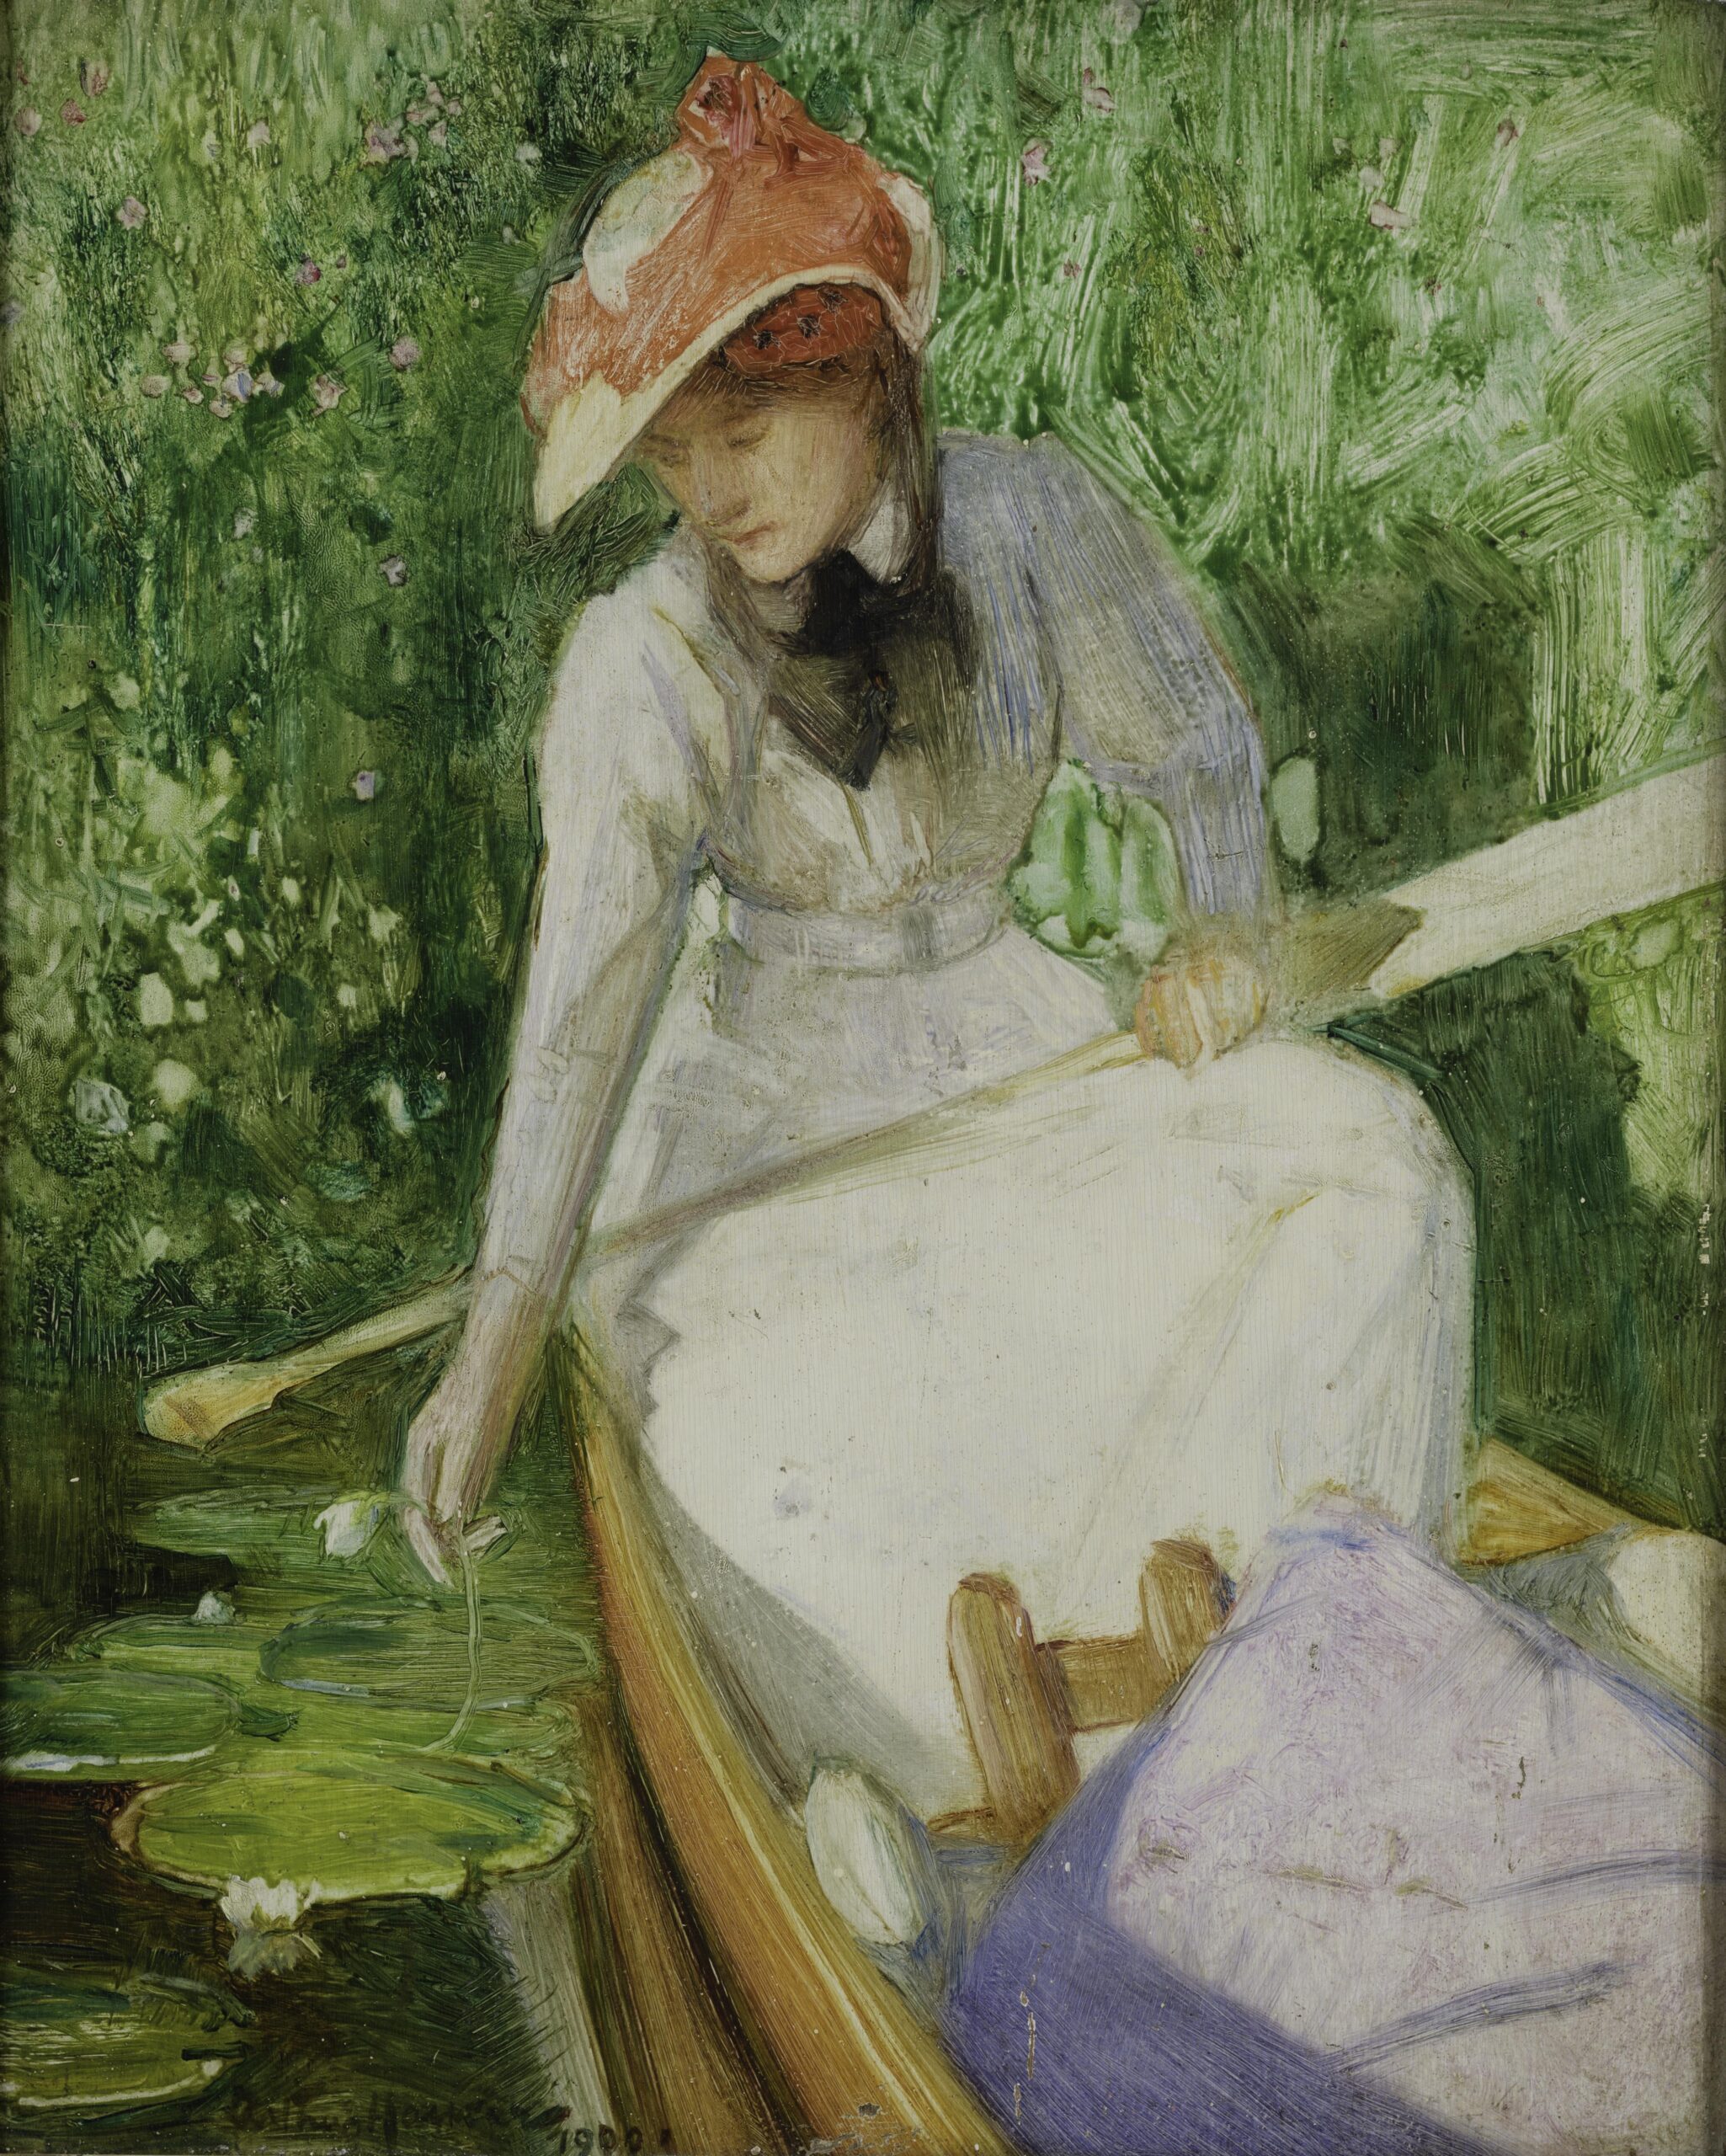 Arthur Hacker, British, 1858–1919, "A Quiet Cove, Girl Canoeing," 1900, Oil on panel, 15 ¾ x 13 inches, Saint Vincent Art & Heritage Collections, Gift of Michael and Aimee Rusinko Kakos, Photograph by Nathan J. Shaulis/Porter Loves. 